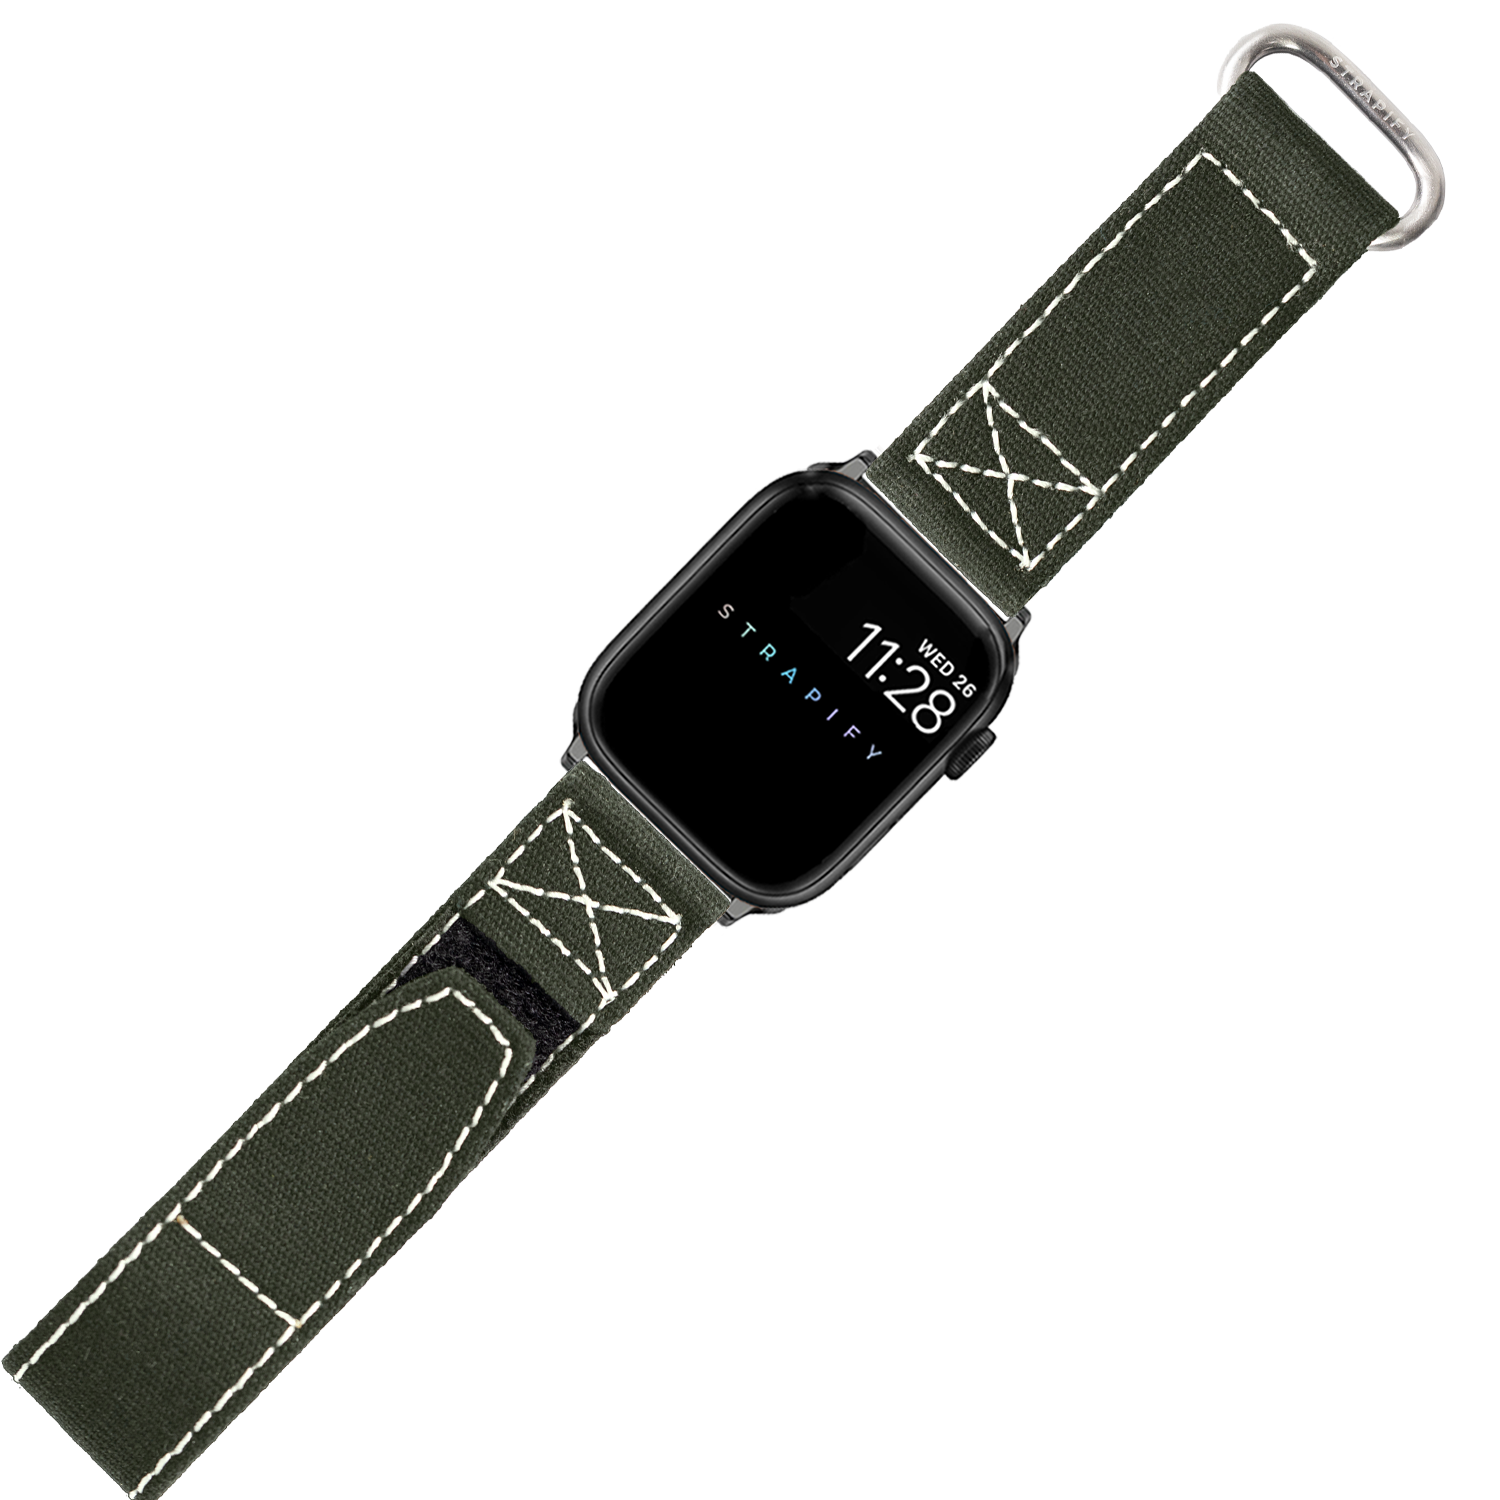 [Apple Watch] Military Velcro - Army Green | White Stitching